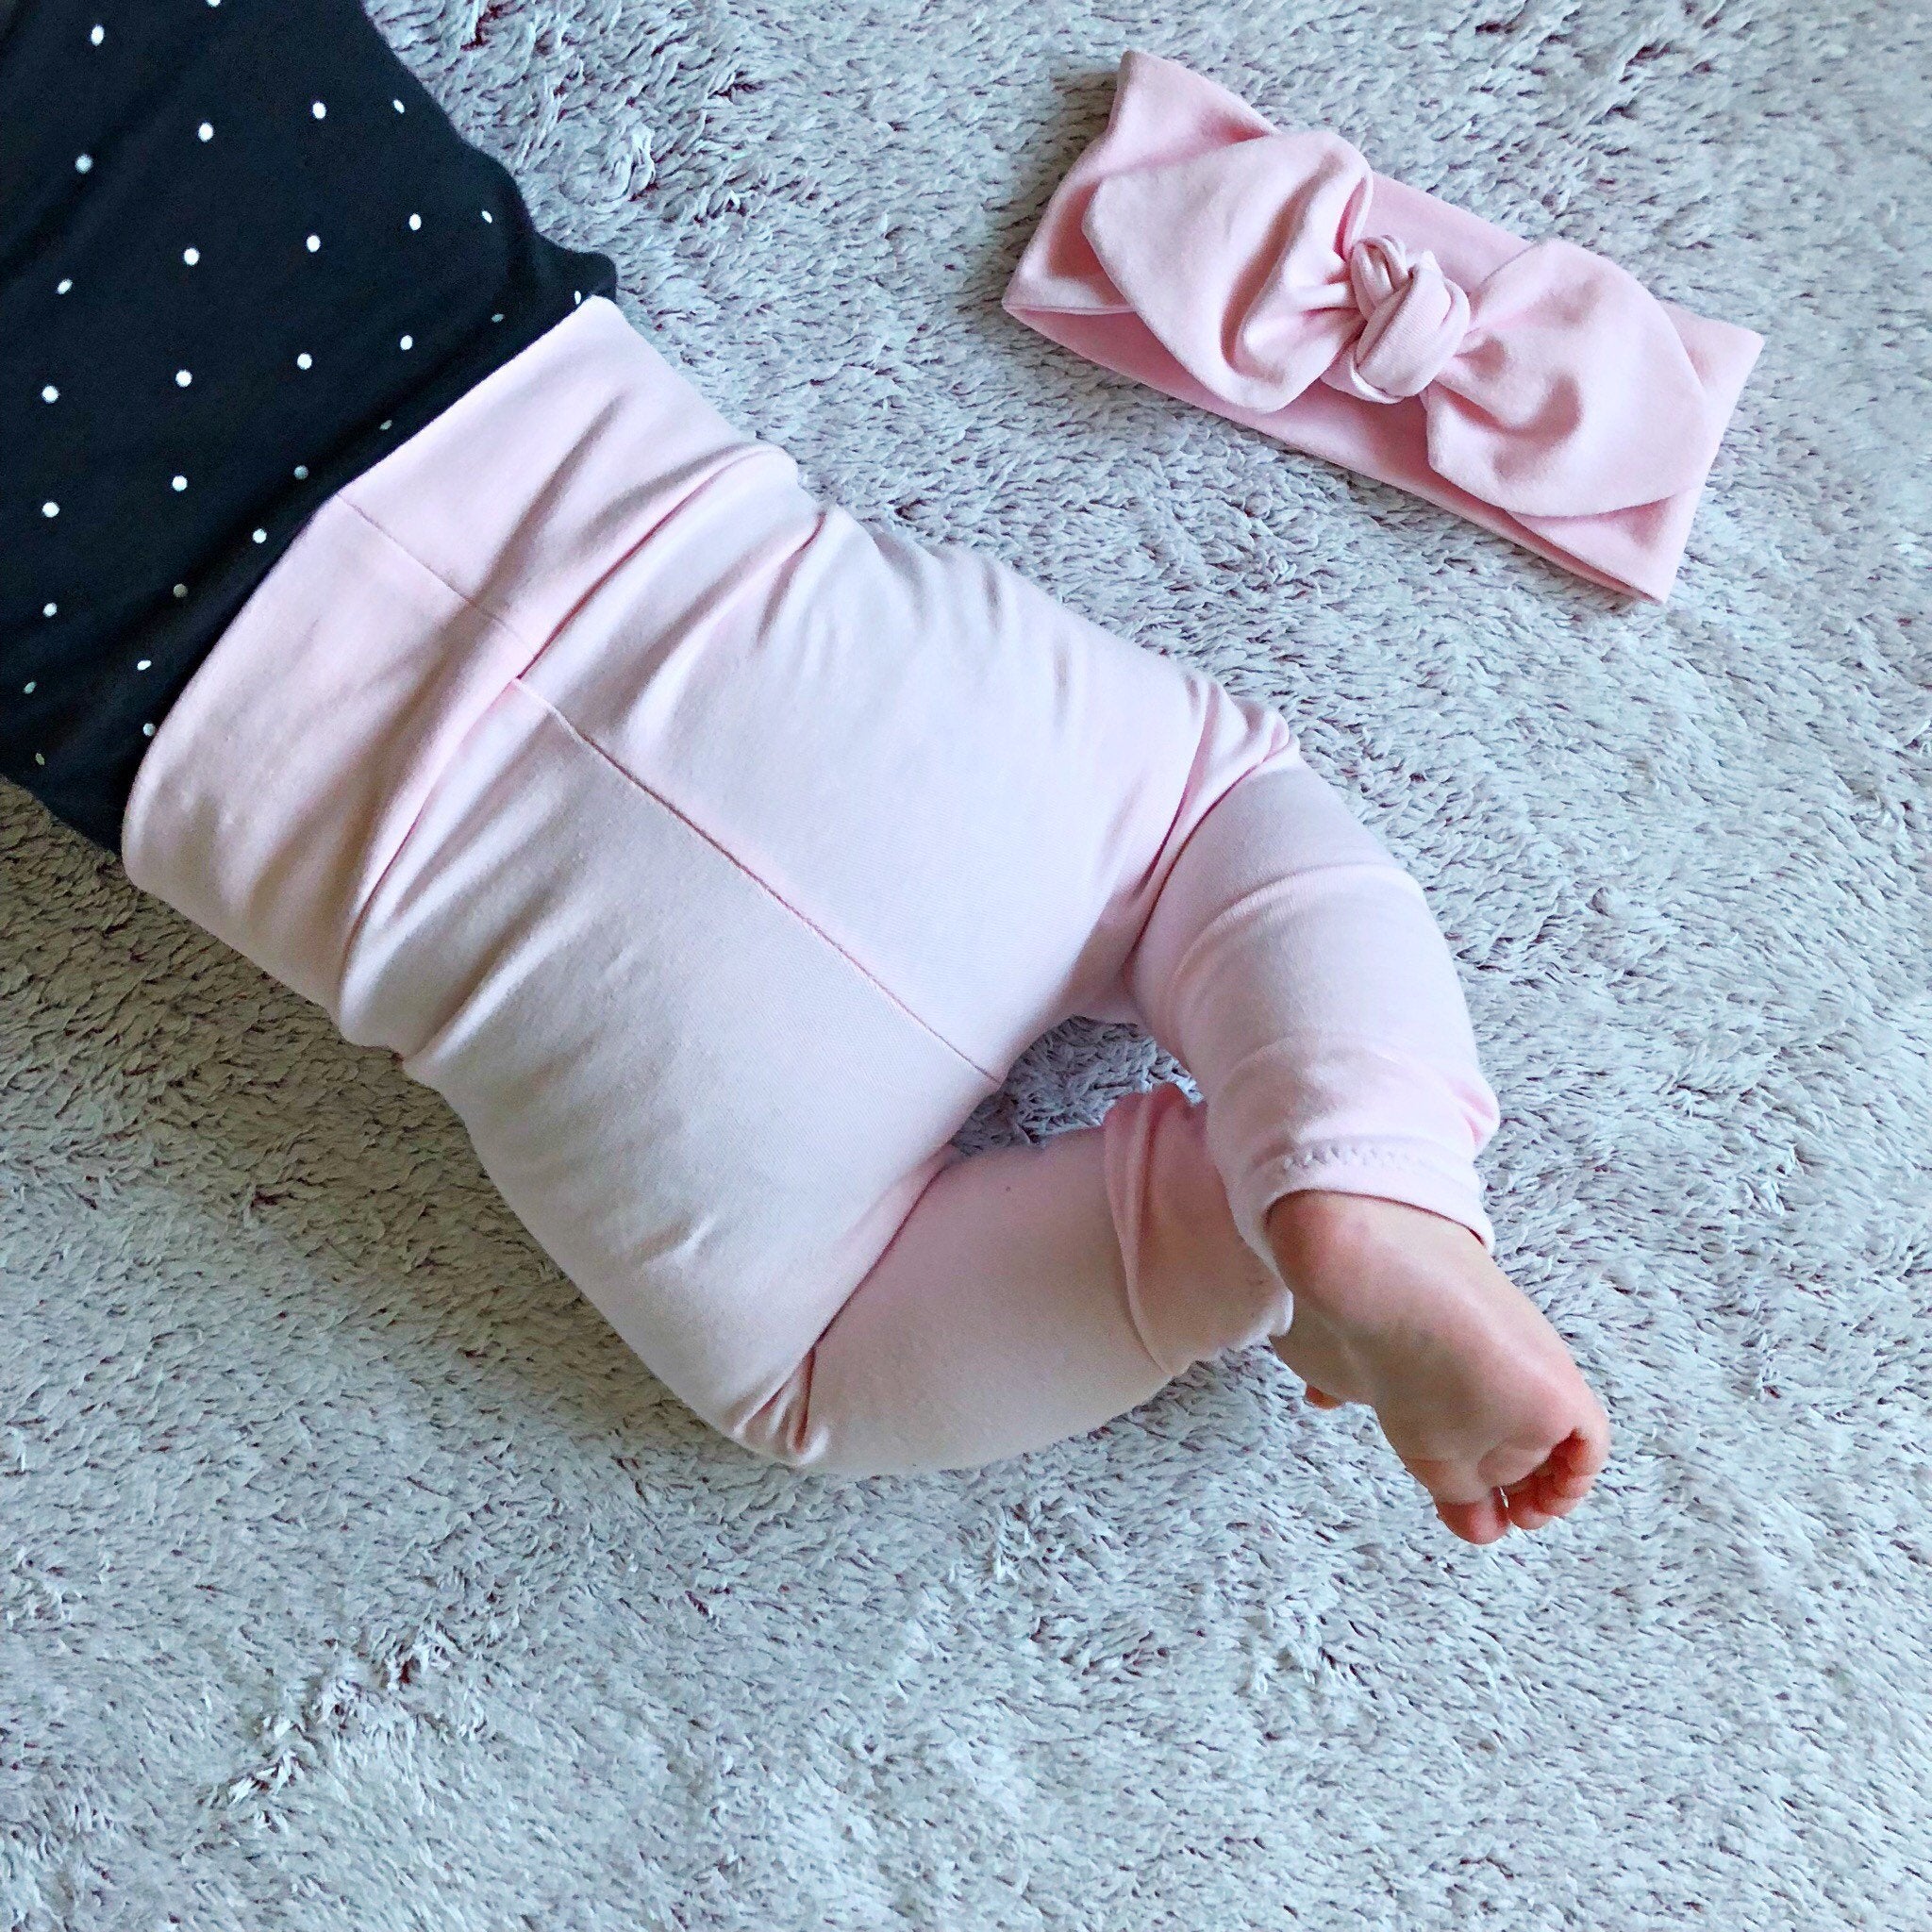 Baby Pink Leggings and/or Headbands